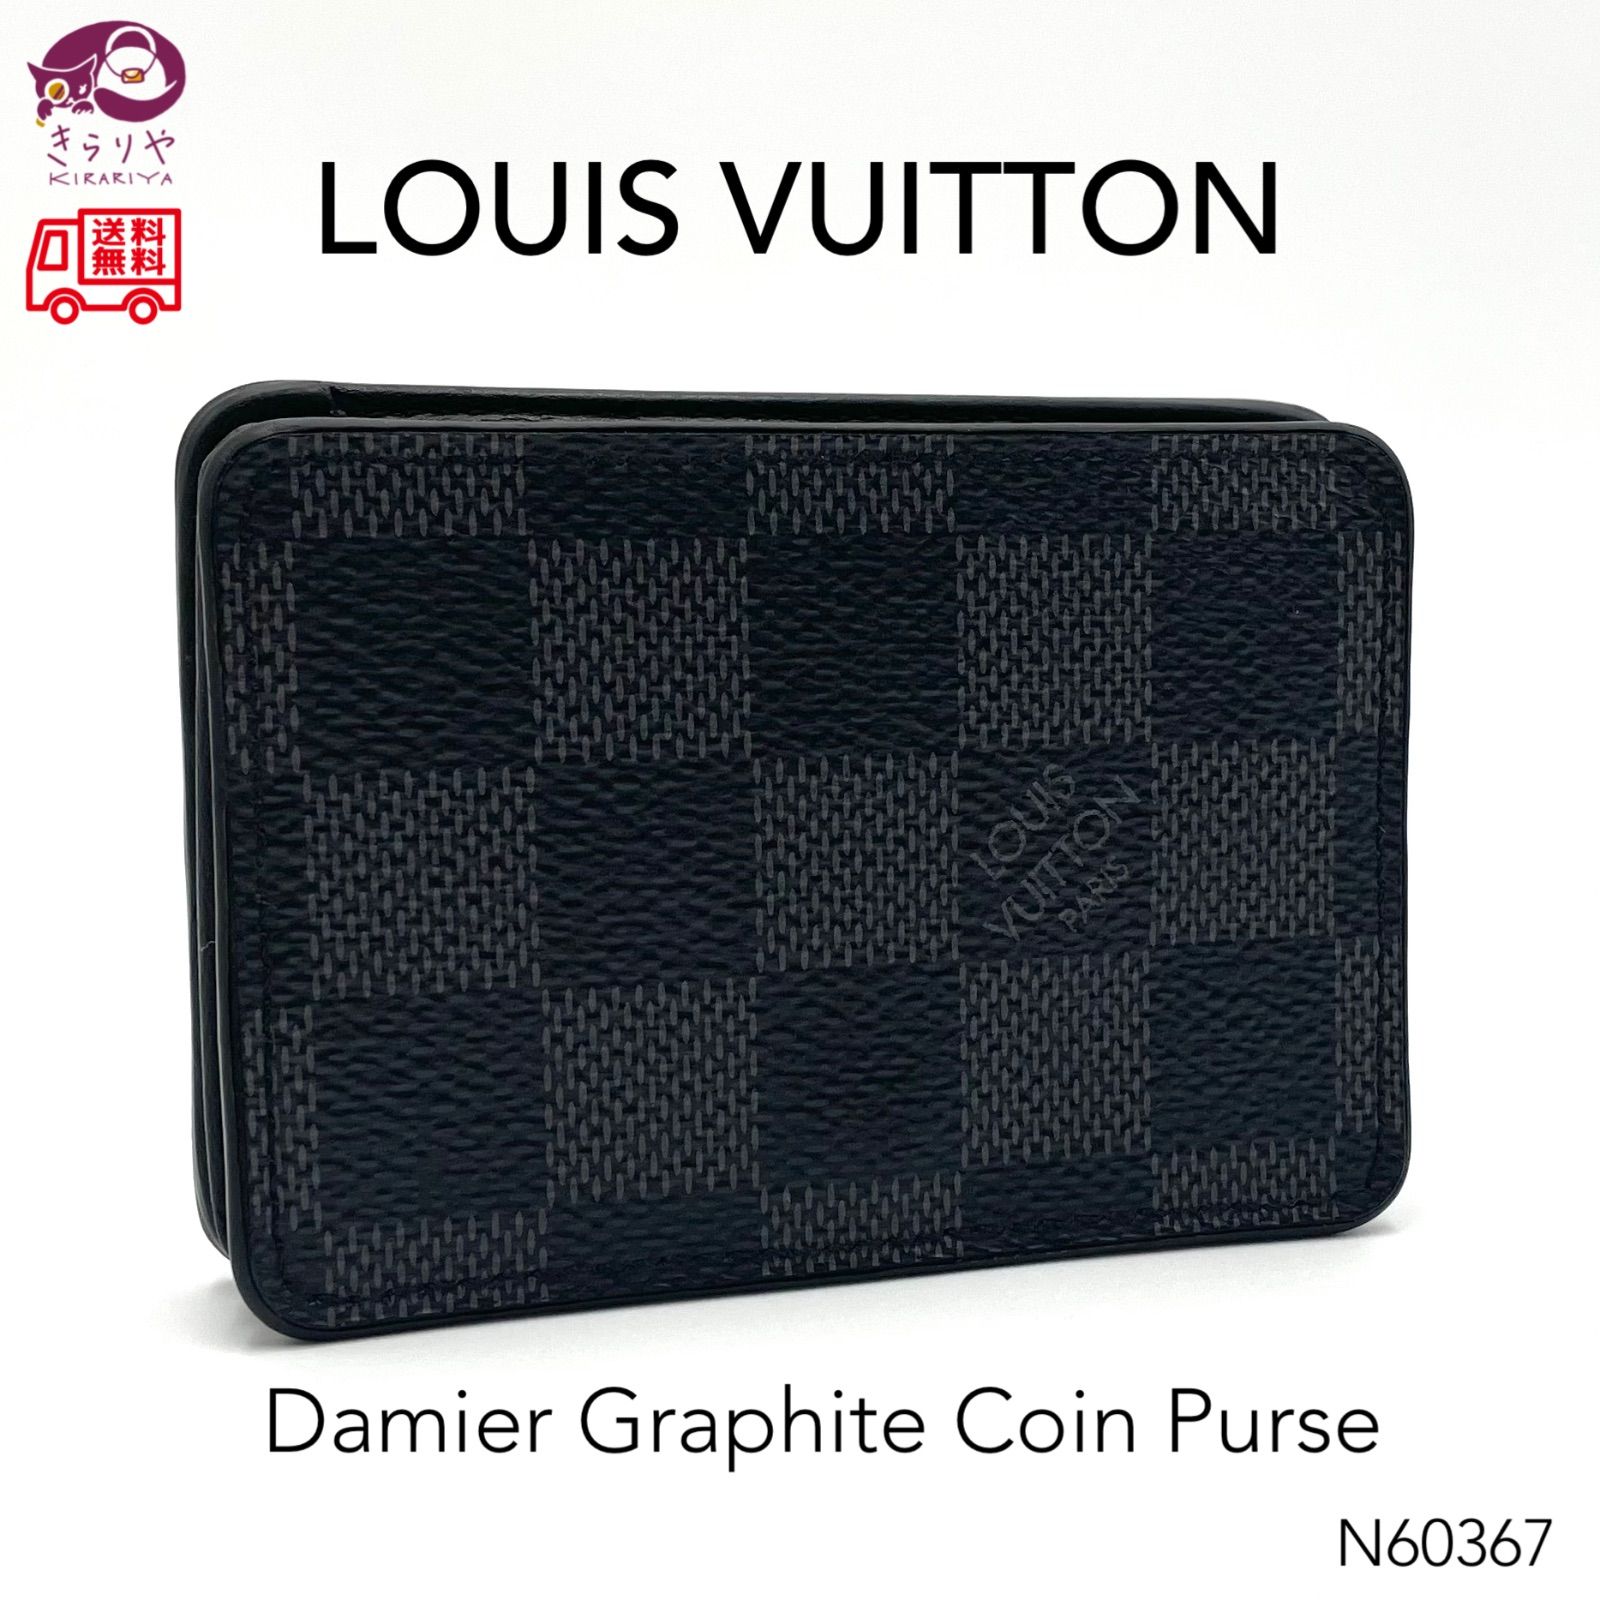 LOUIS VUITTON ルイヴィトン N60367 ダミエグラフィット コインパース